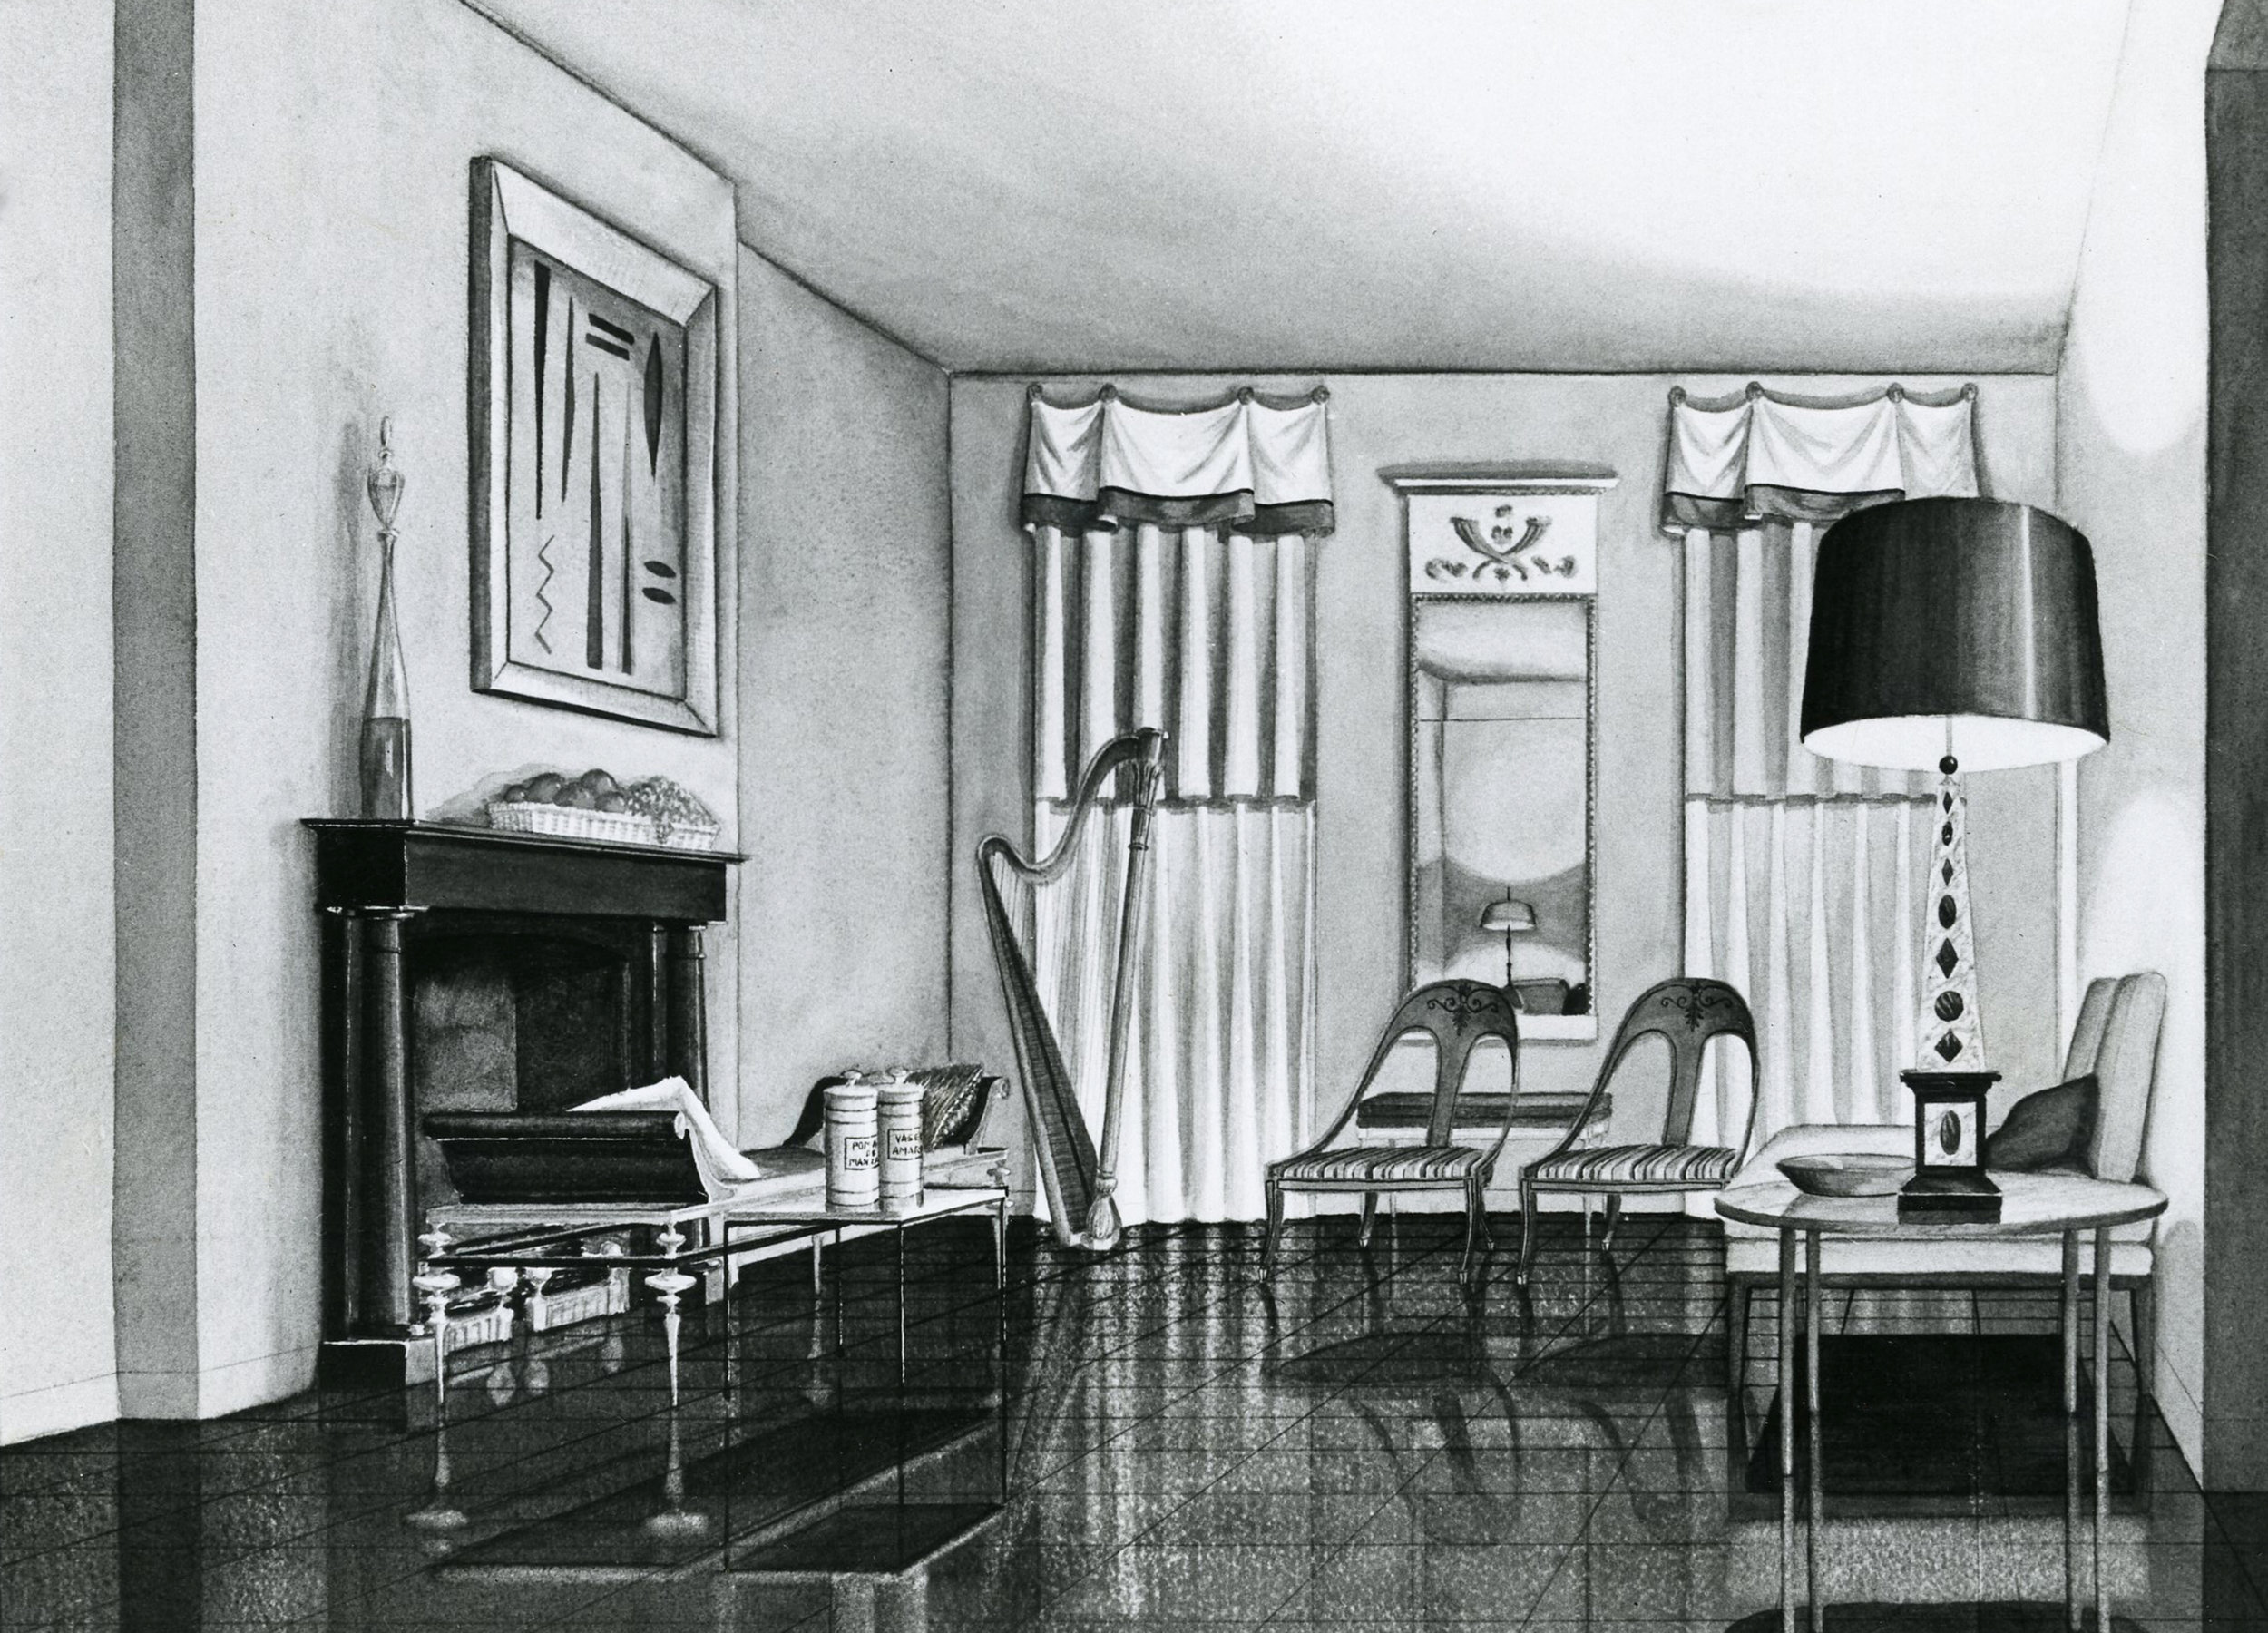 hand-rendering-and-model-of-a-one-room-house-by-gil-velasquez-1953_24118519619_o.jpg